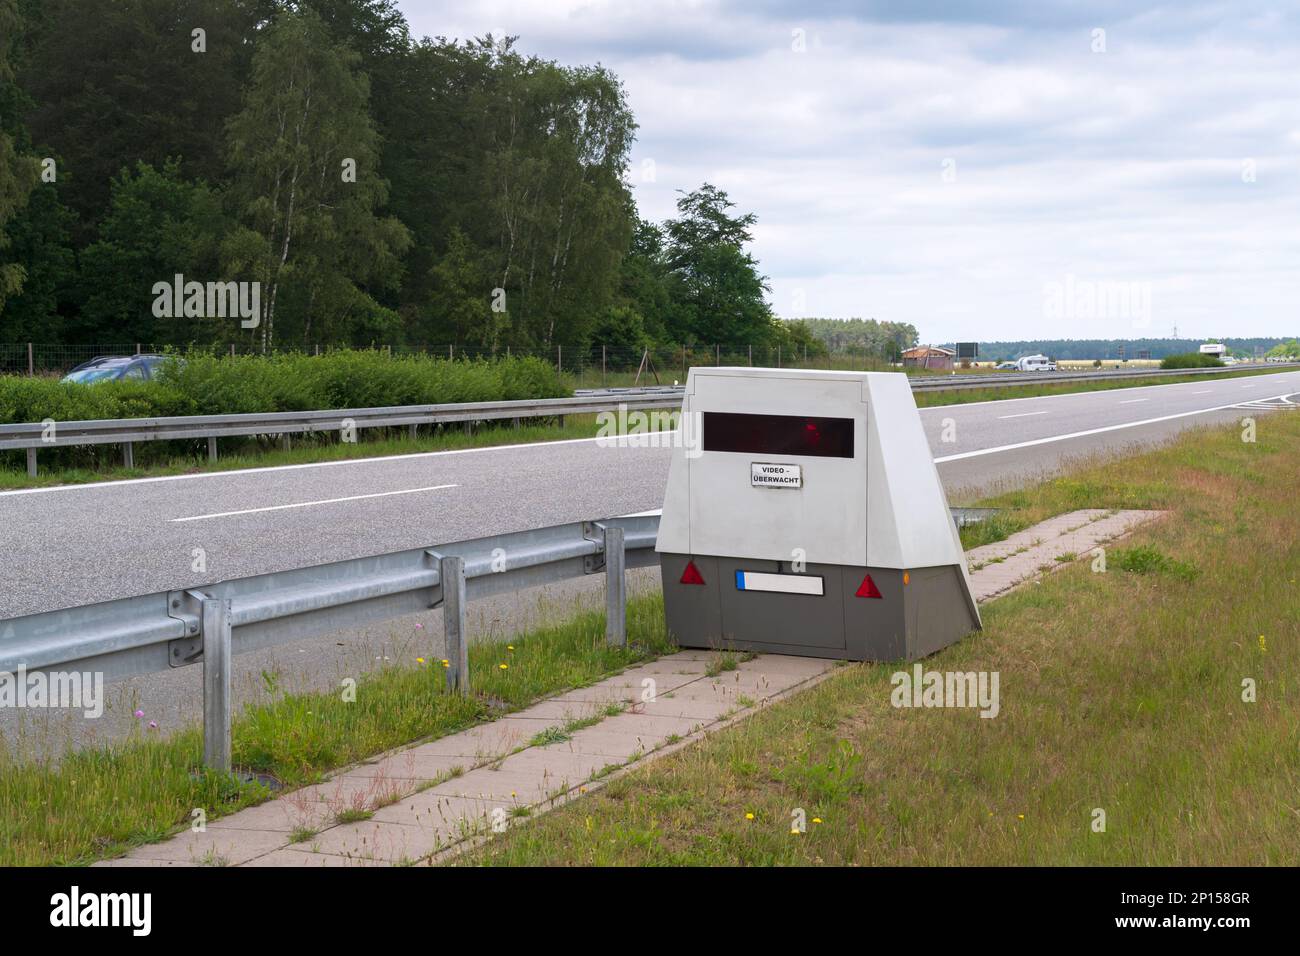 https://c8.alamy.com/comp/2P158GR/a-so-called-speed-camera-trailer-with-the-inscription-video-monitored-for-fear-of-vandalism-2P158GR.jpg